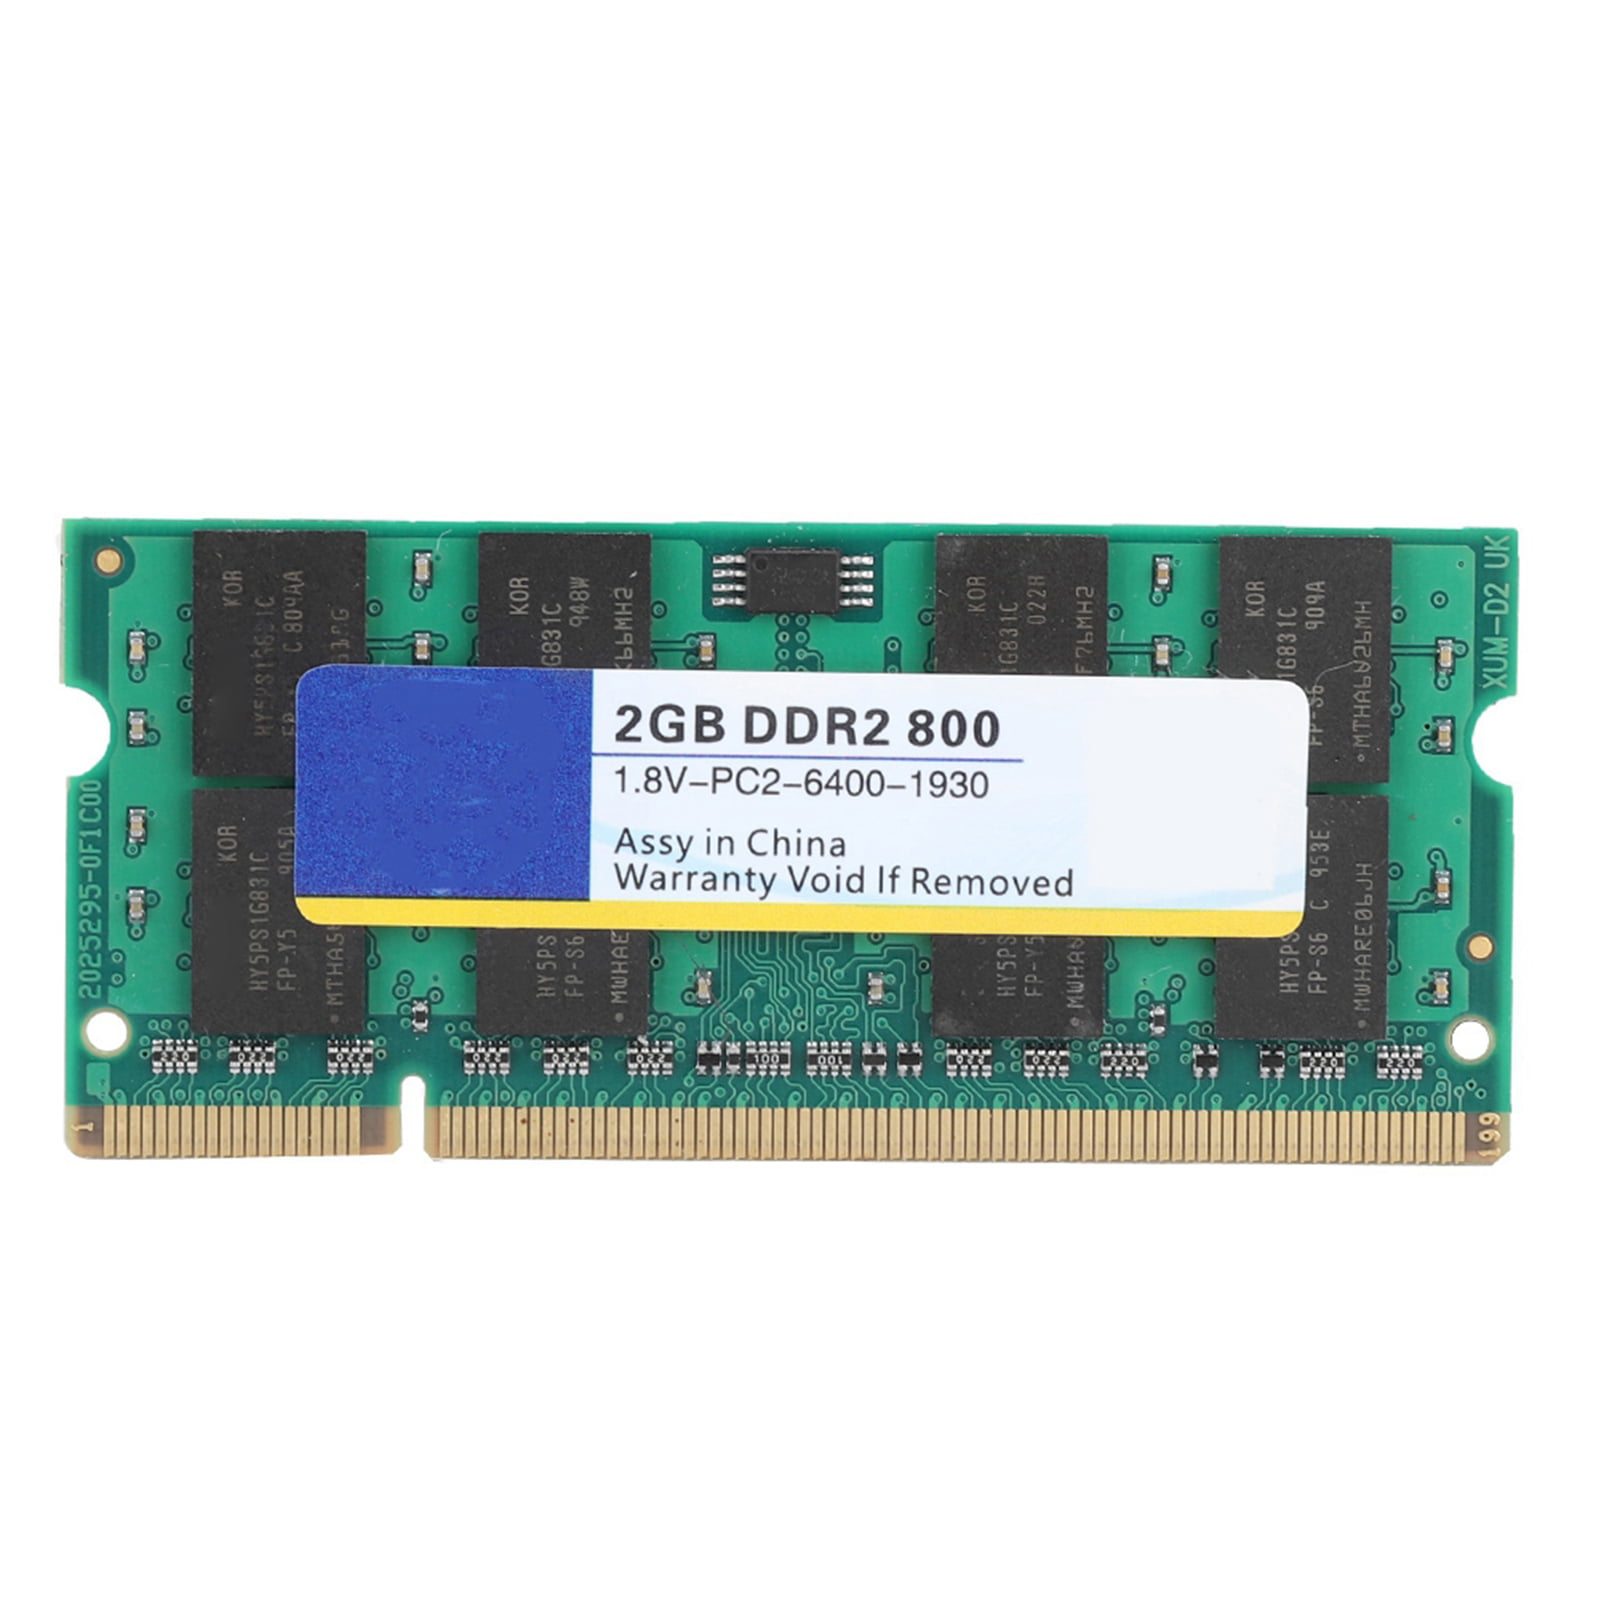 antenne nikotin fumle Agatige Laptop Memory RAM, DDR 800MHz,Xiede DDR2 800Mhz 2G 1.8V 200Pin For  Laptop High Running Speed Memory RAM Fully Compatible - Walmart.com